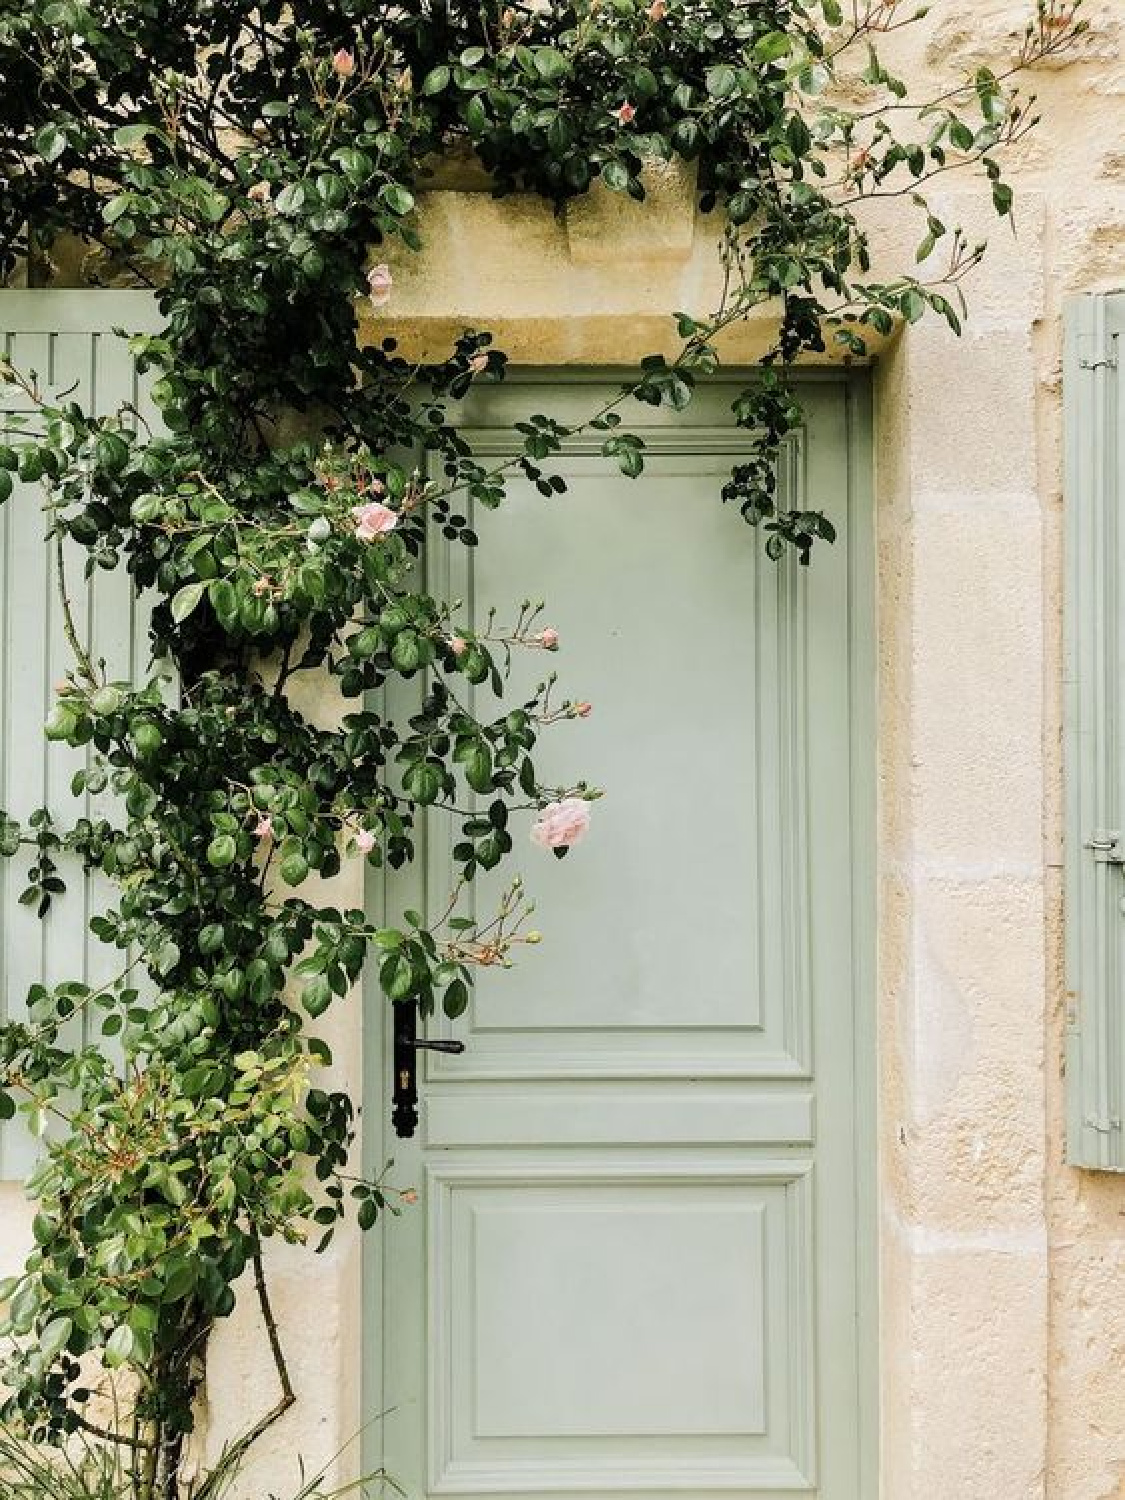 Sage green door with limestone and creeping roses in Provence - A Beautiful Plate. #sagegreen #provencestyle